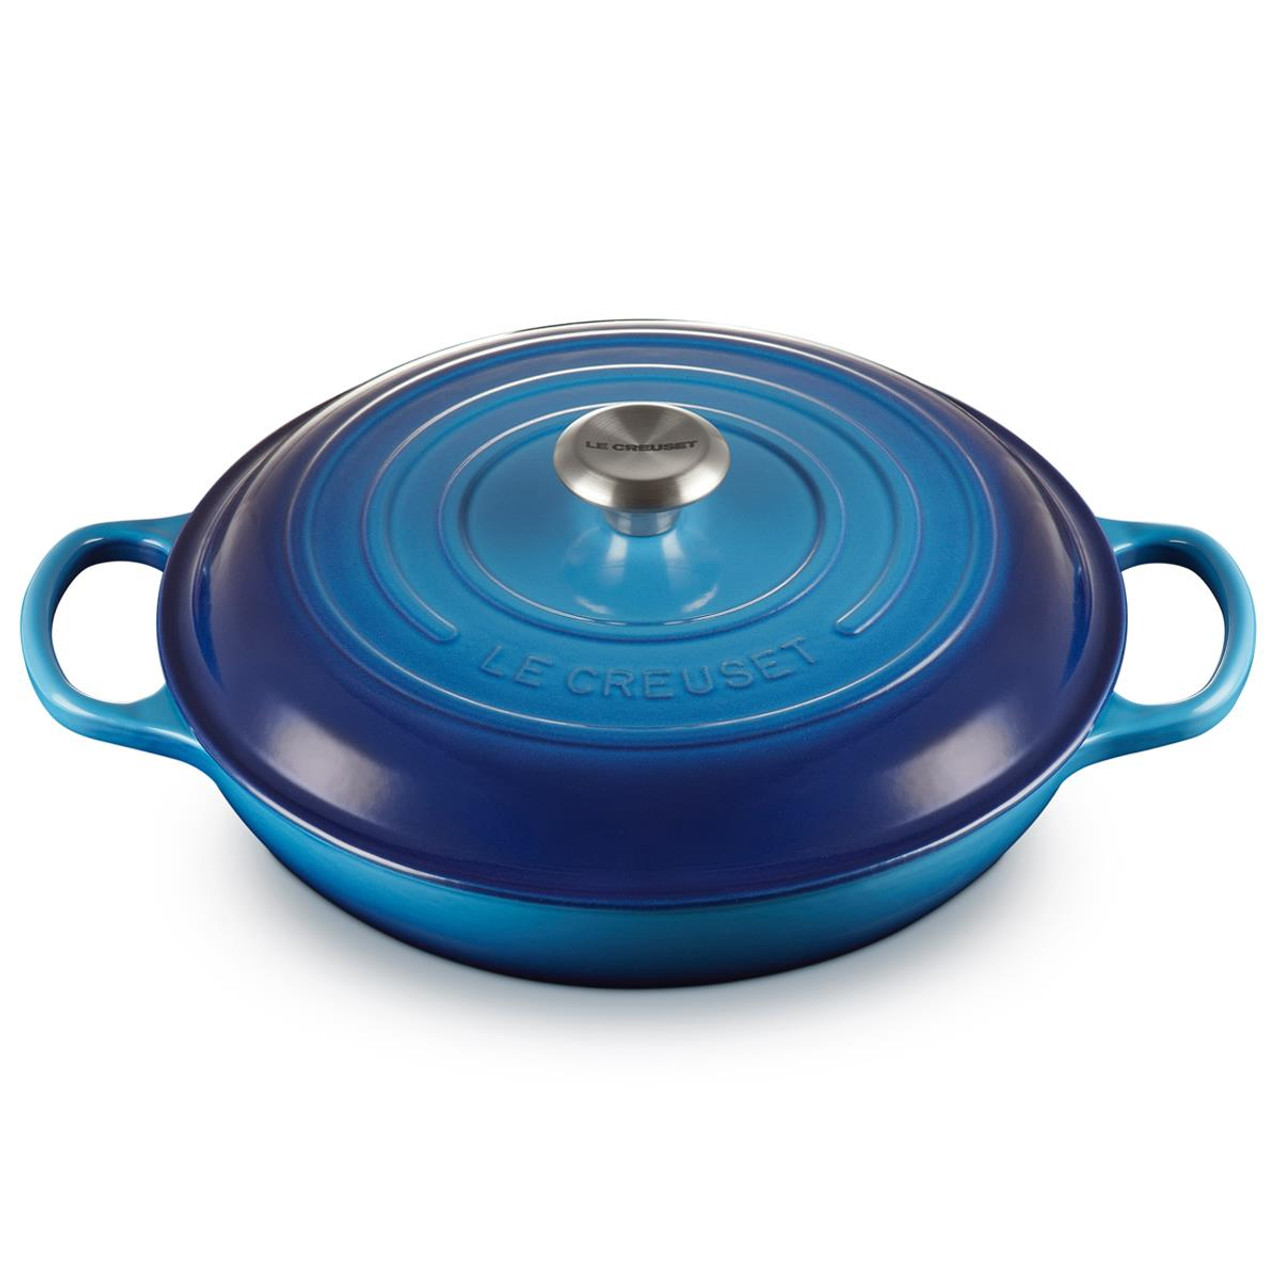 Is transferring meals with the Le Creuset shallow casserole easy?